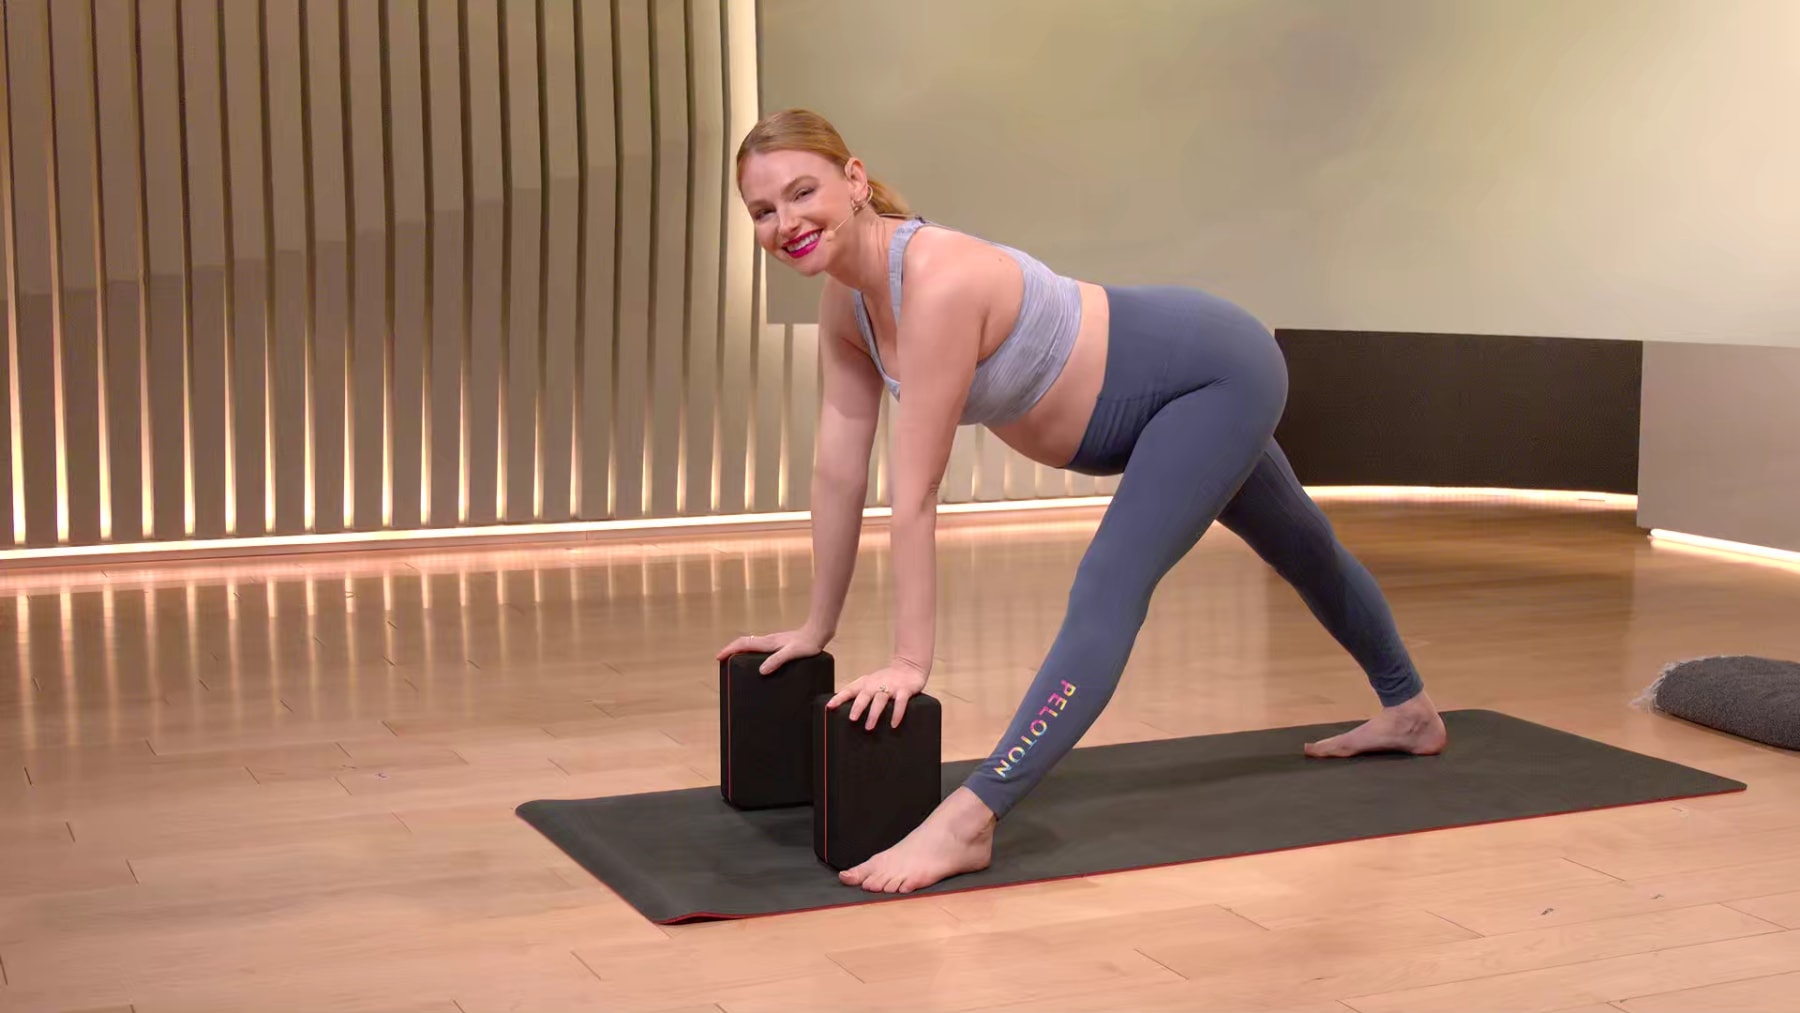 Peloton - Peloton Yoga Instructor Anna Greenberg - Peloton wants you to  find your purpose in this week's Friday fitness tip: In the midst of rapid  change and uncertainty, doing things intentionally